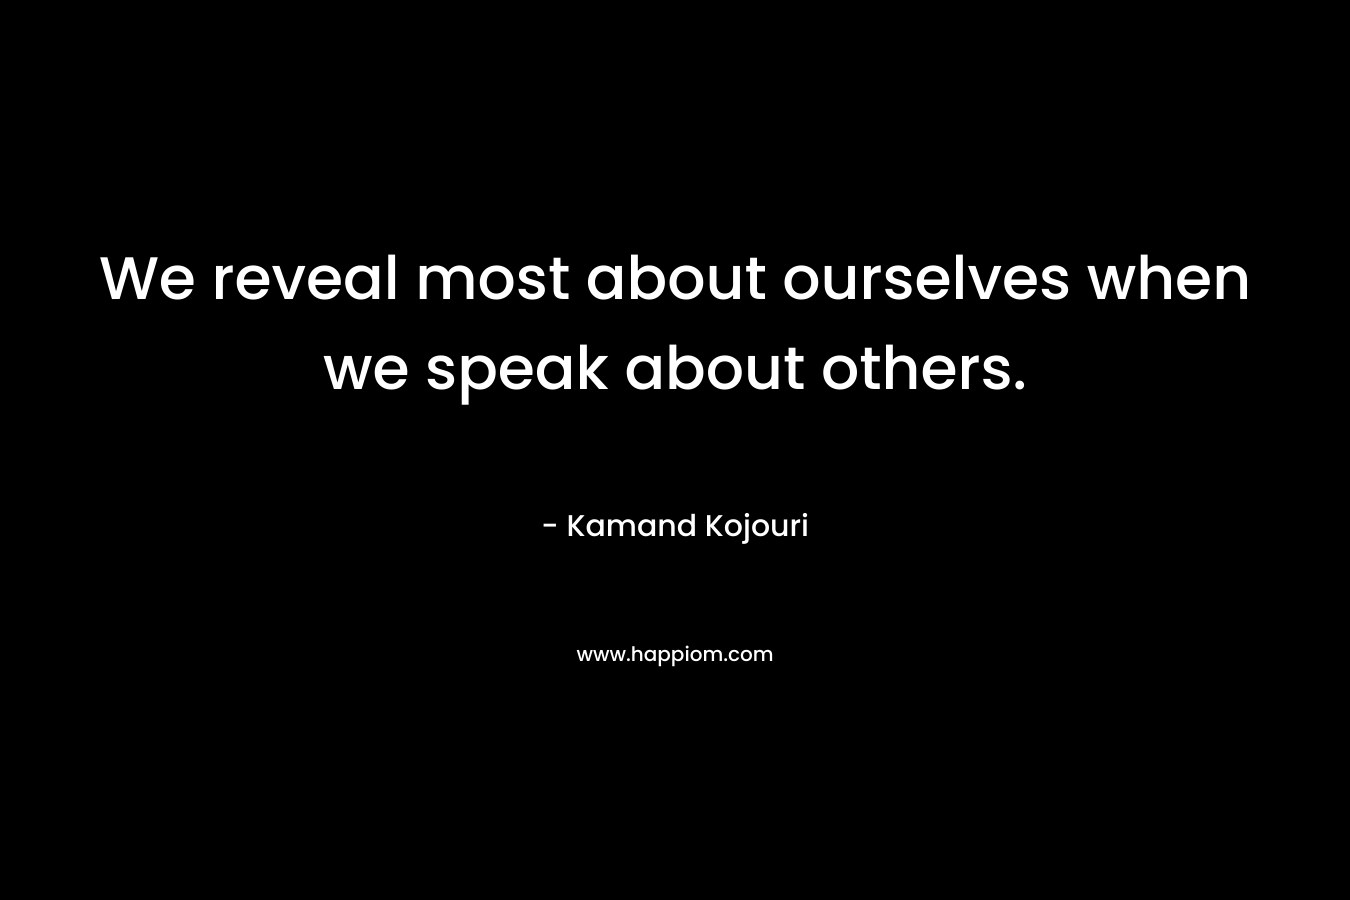 We reveal most about ourselves when we speak about others.